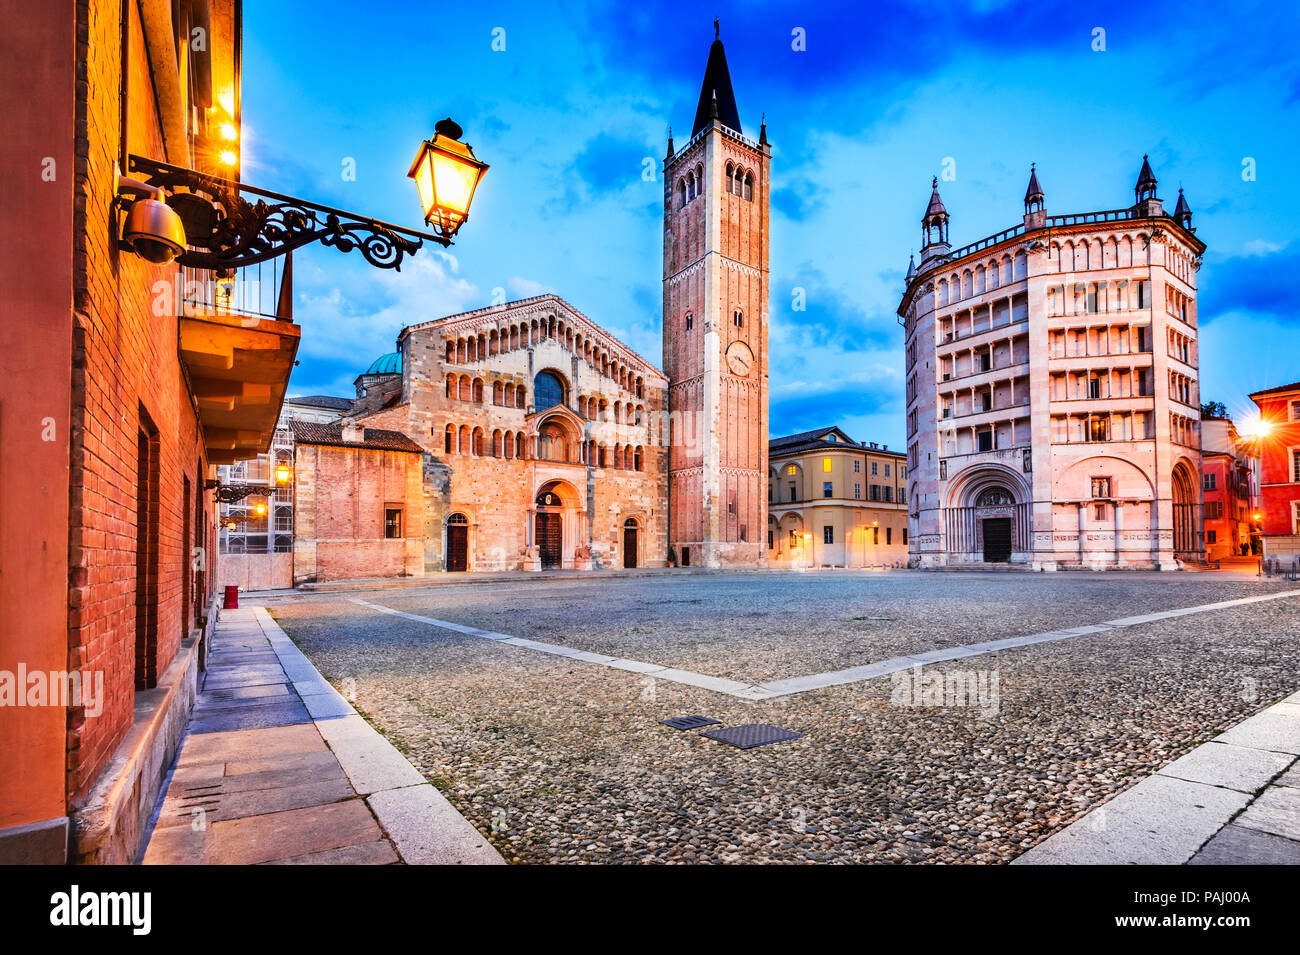 Parma, Italy - Piazza del Duomo with the Cathedral and Baptistery, built in 1059. Romanesque architecture in Emilia-Romagna. Stock Photo